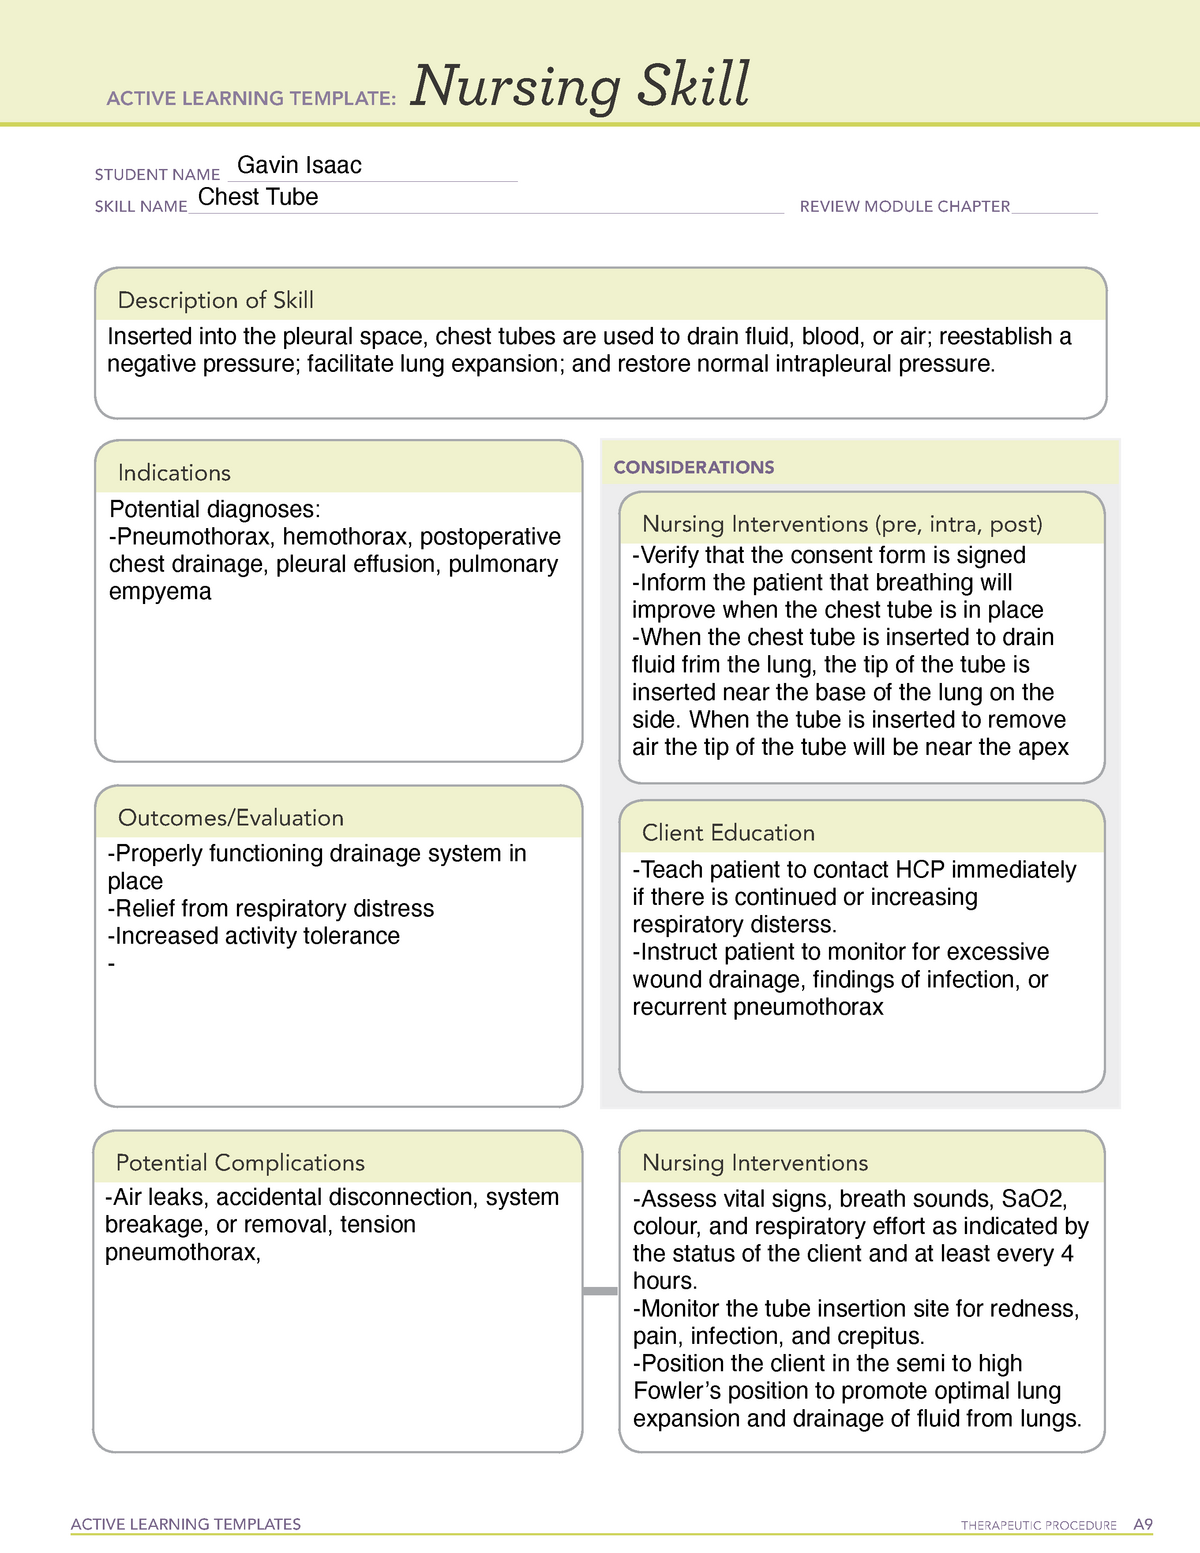 Skill Chest Tube Active Learning Template ACTIVE LEARNING TEMPLATES